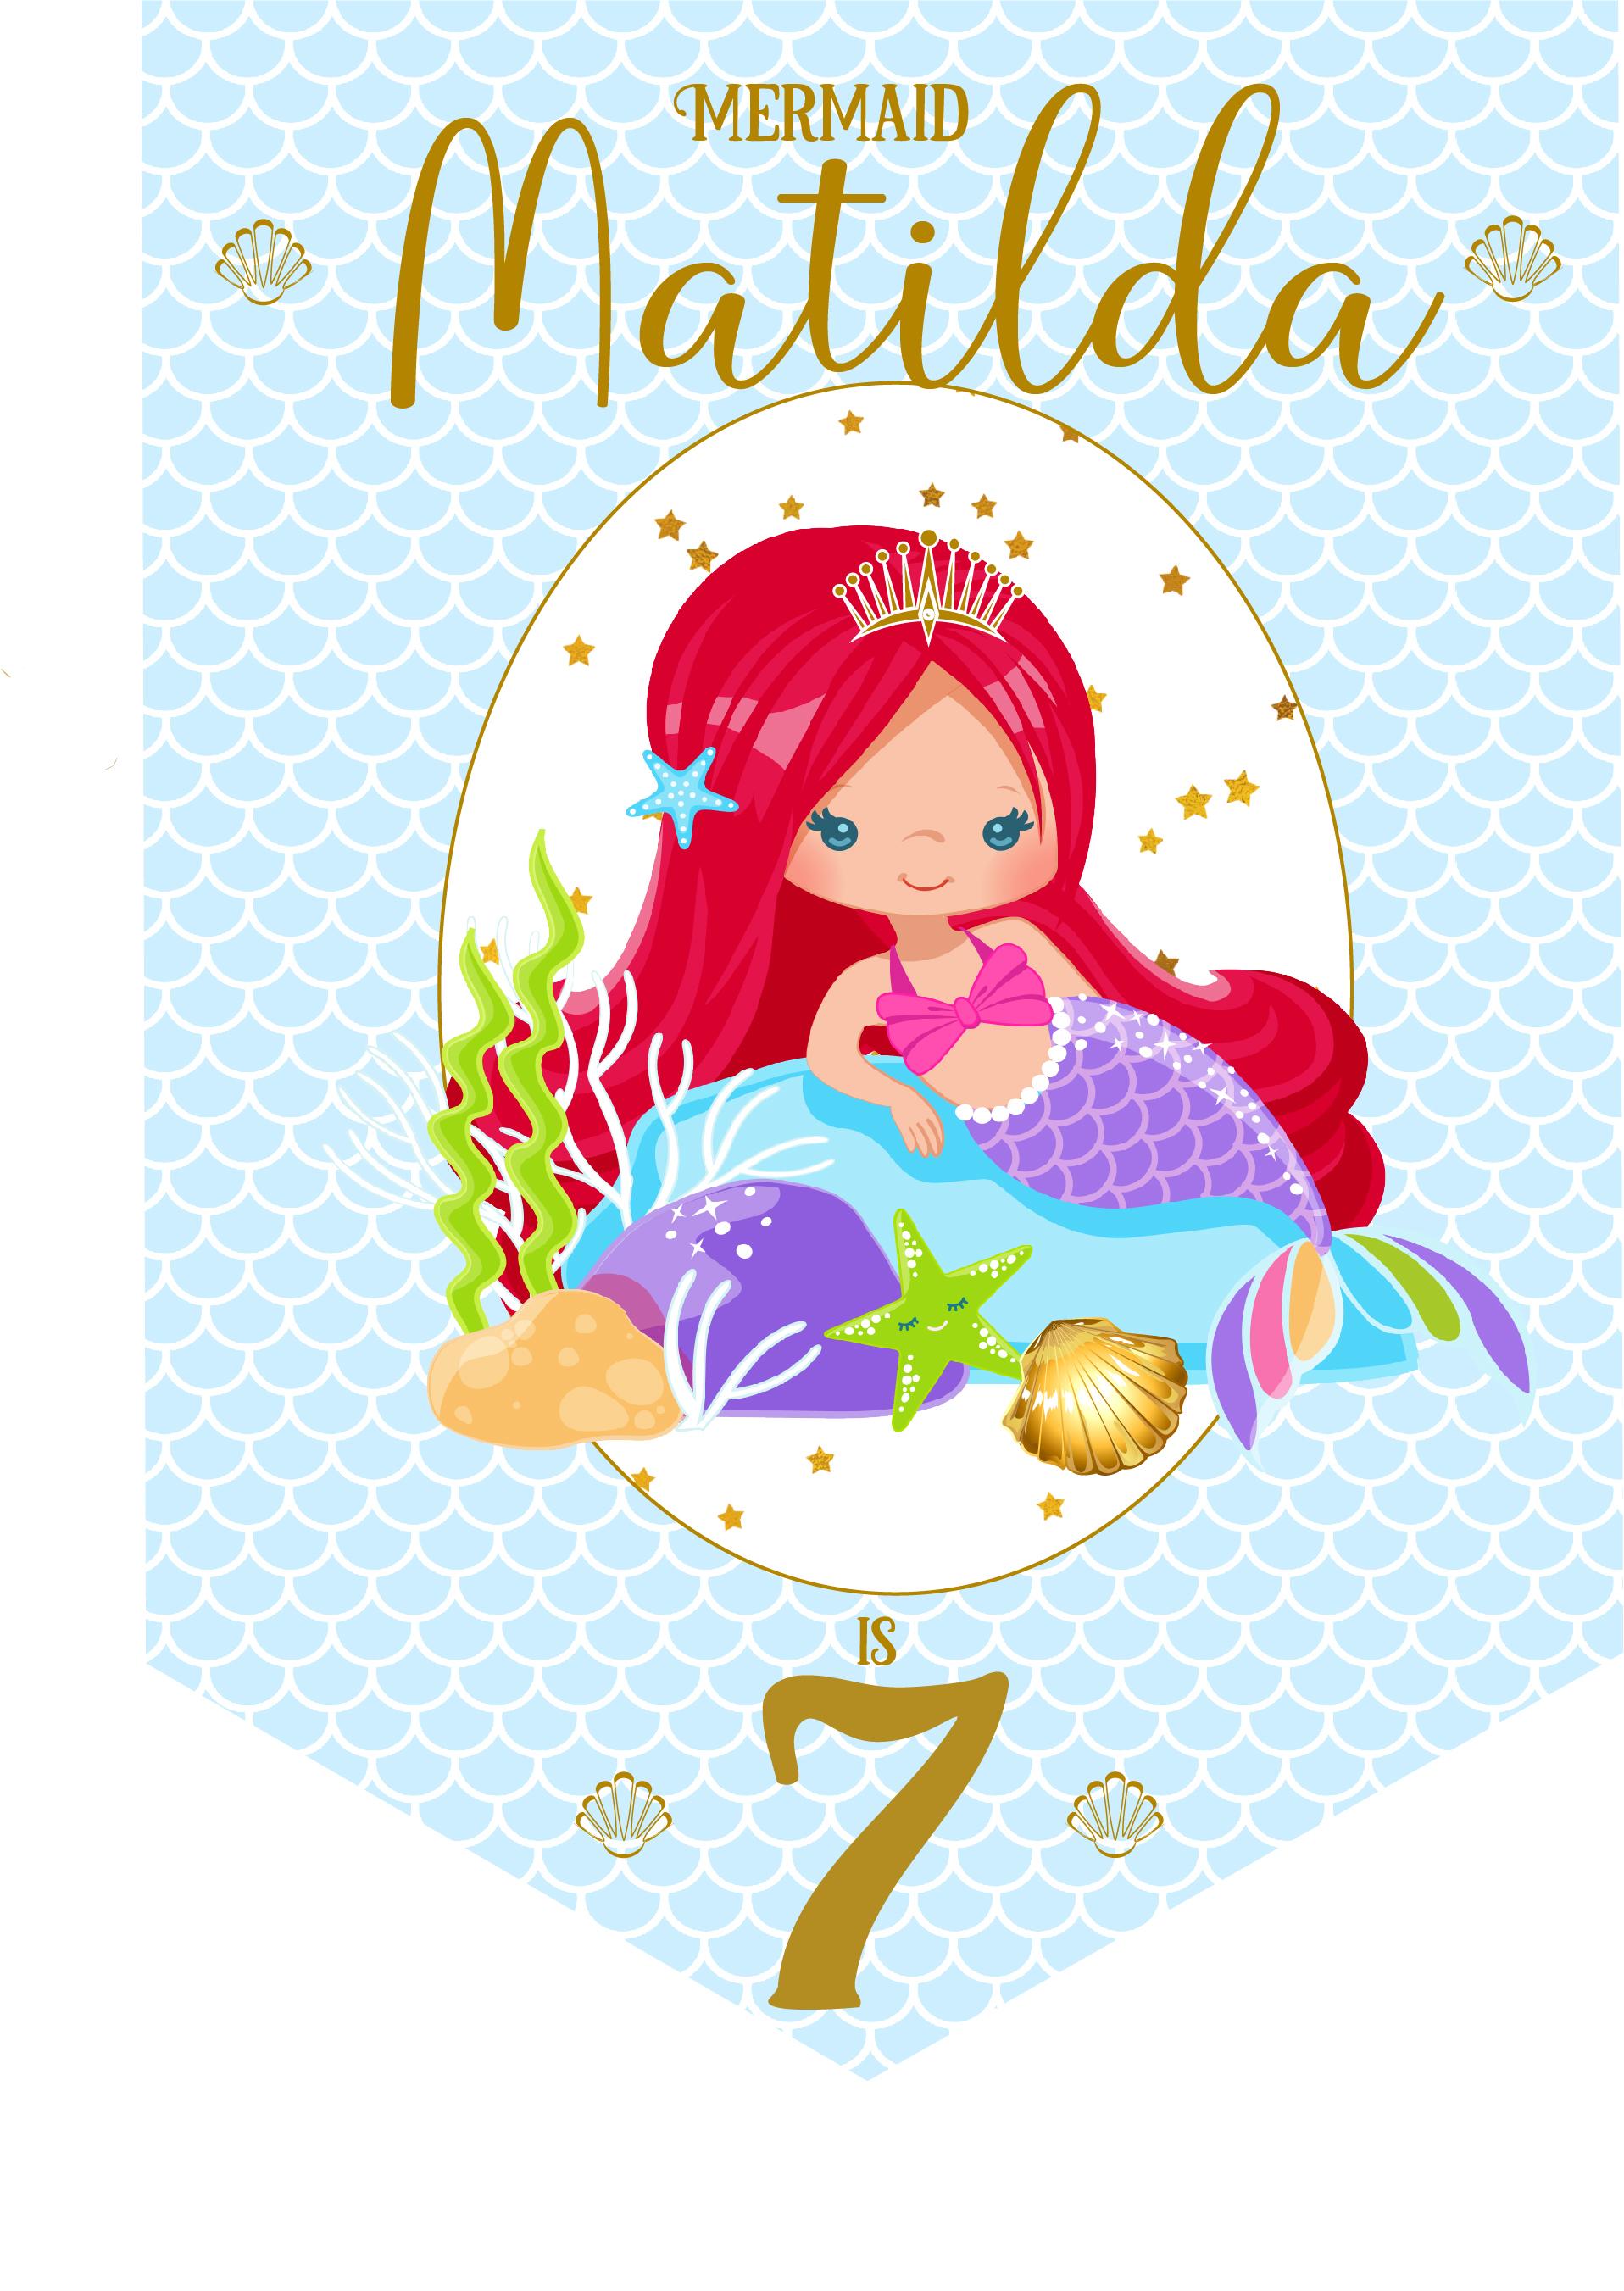 Mermaid Birthday Bunting,Personalised Childrens Birthday Party Banner,Garland,Choice of Hair Colour